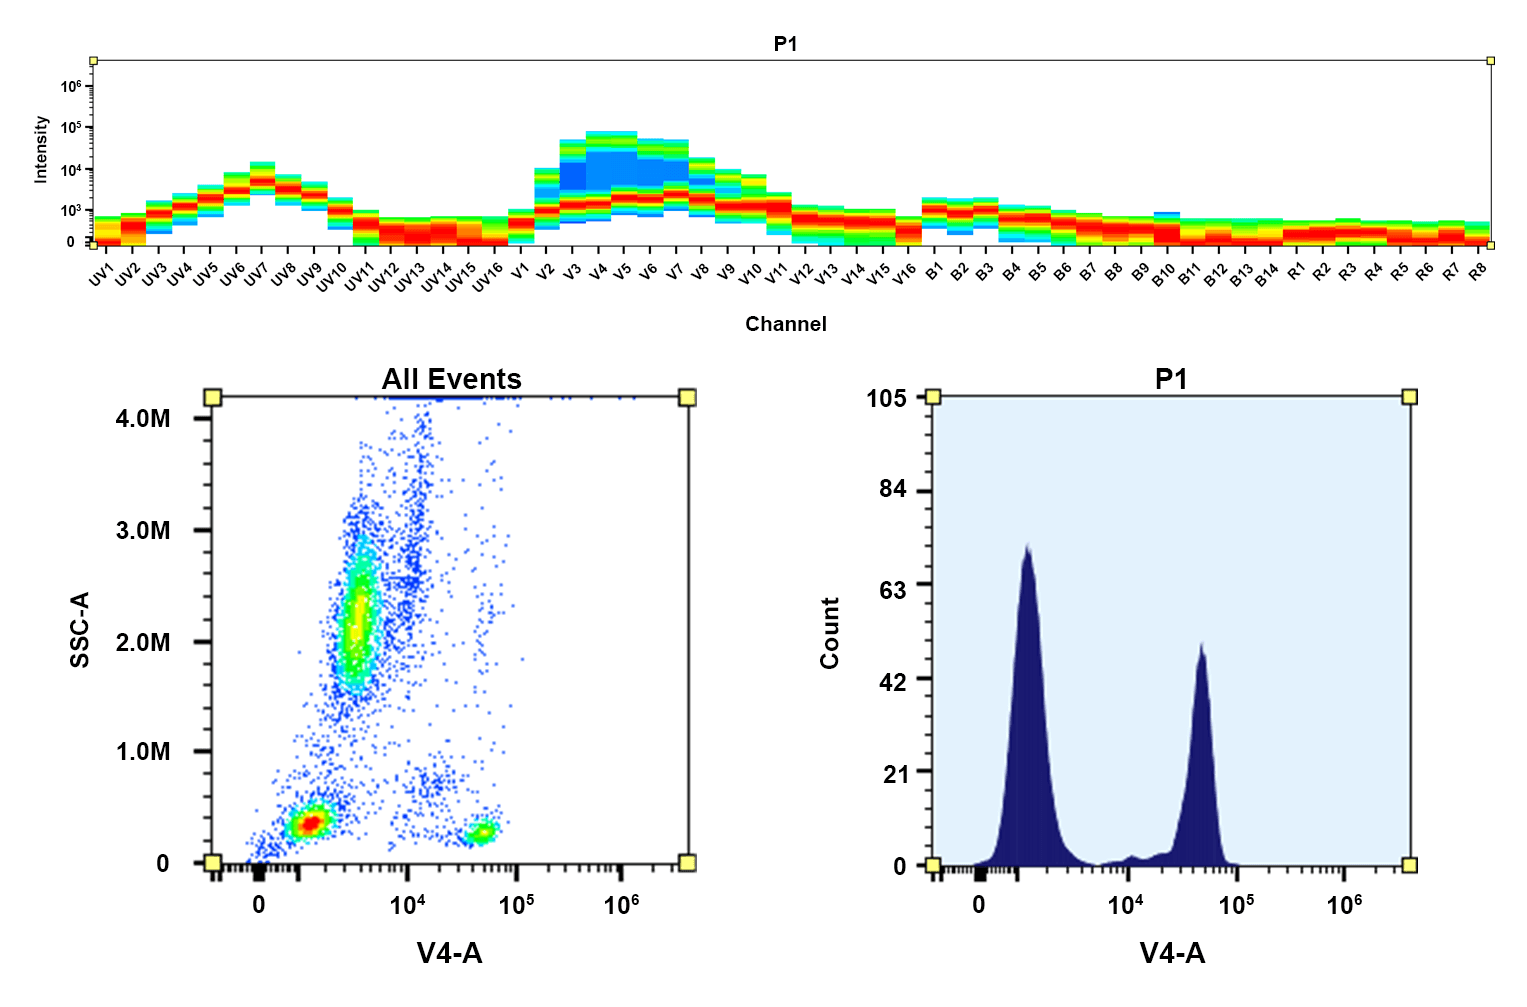 Figure 1. Top) Spectral pattern was generated using a 4-laser spectral cytometer. Spatially offset lasers (355 nm, 405 nm, 488 nm, and 640 nm) were used to generate four distinct emission profiles, then, when combined, yielded the overall spectral signature. Bottom) Flow cytometry analysis of whole blood cells stained with CD4-mFluor™ Violet 480 conjugate. The fluorescence signal was monitored using an Aurora spectral flow cytometer in the mFluor™ Violet 480 specific V4-A channel.